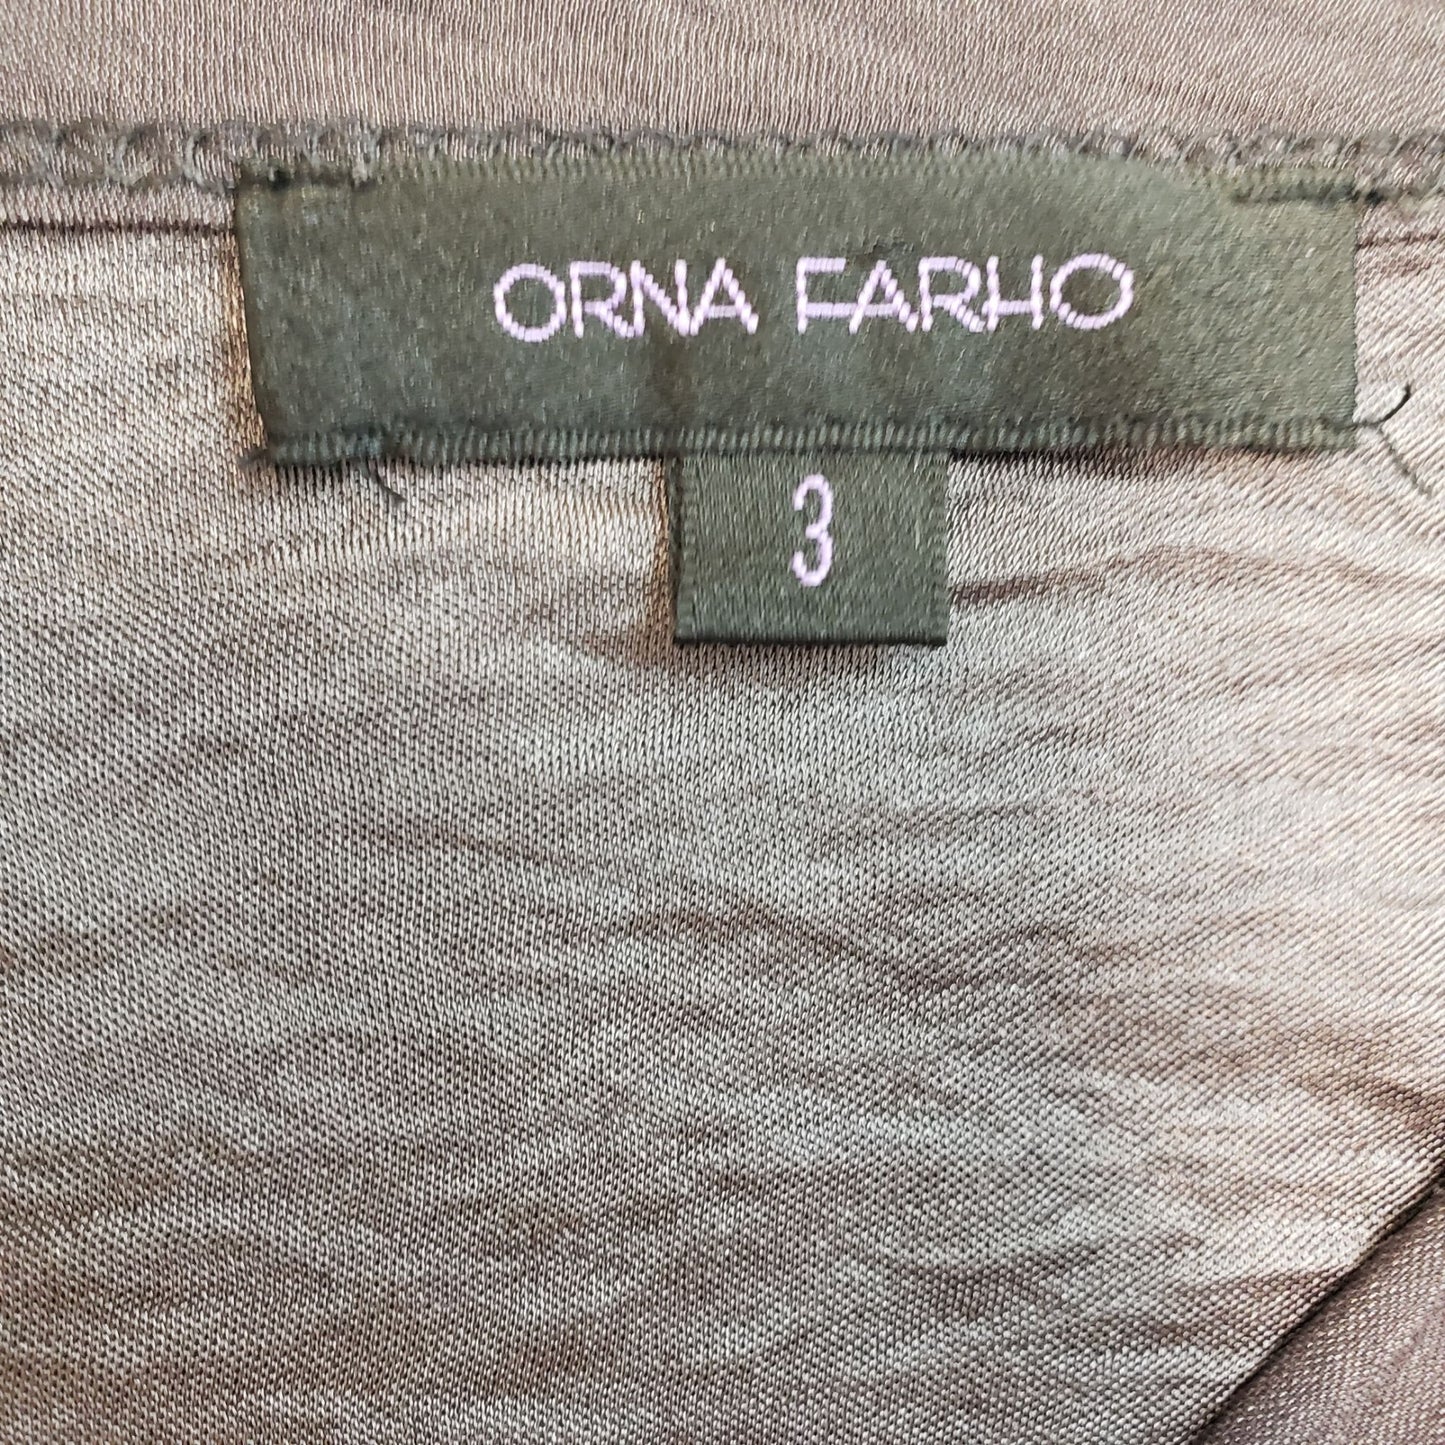 Orna Farho Wool Blend Button Front Blouse with Beaded Embellishment Size 3/Medium